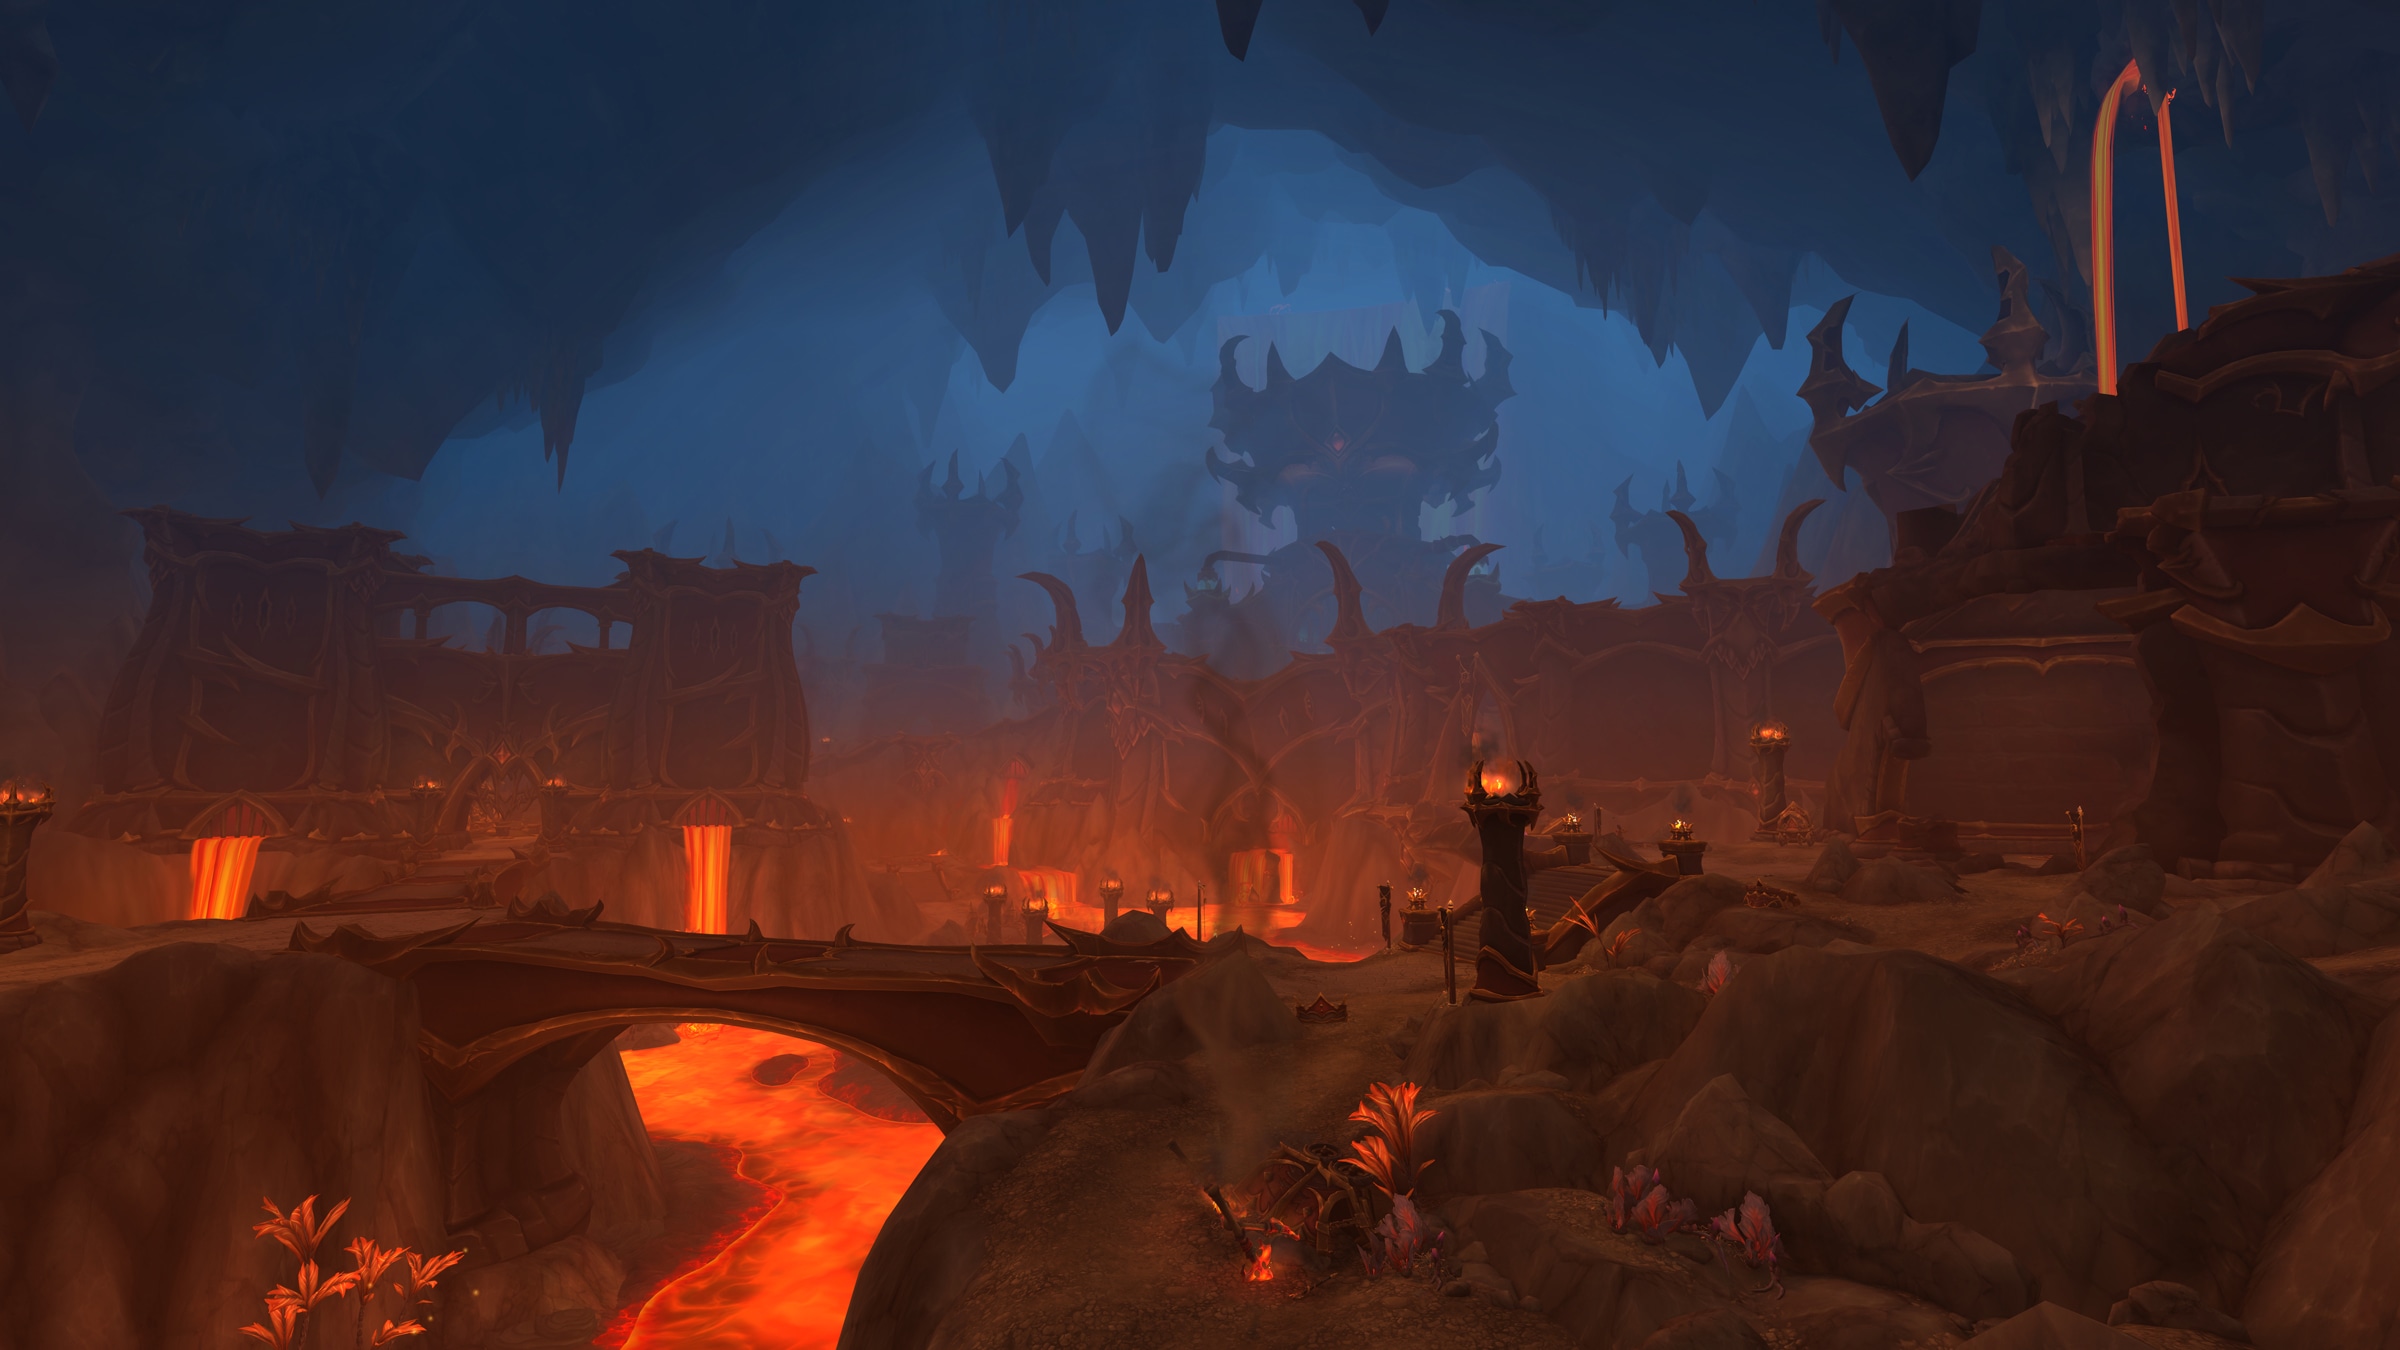 In Development: Looking Ahead to Embers of Neltharion